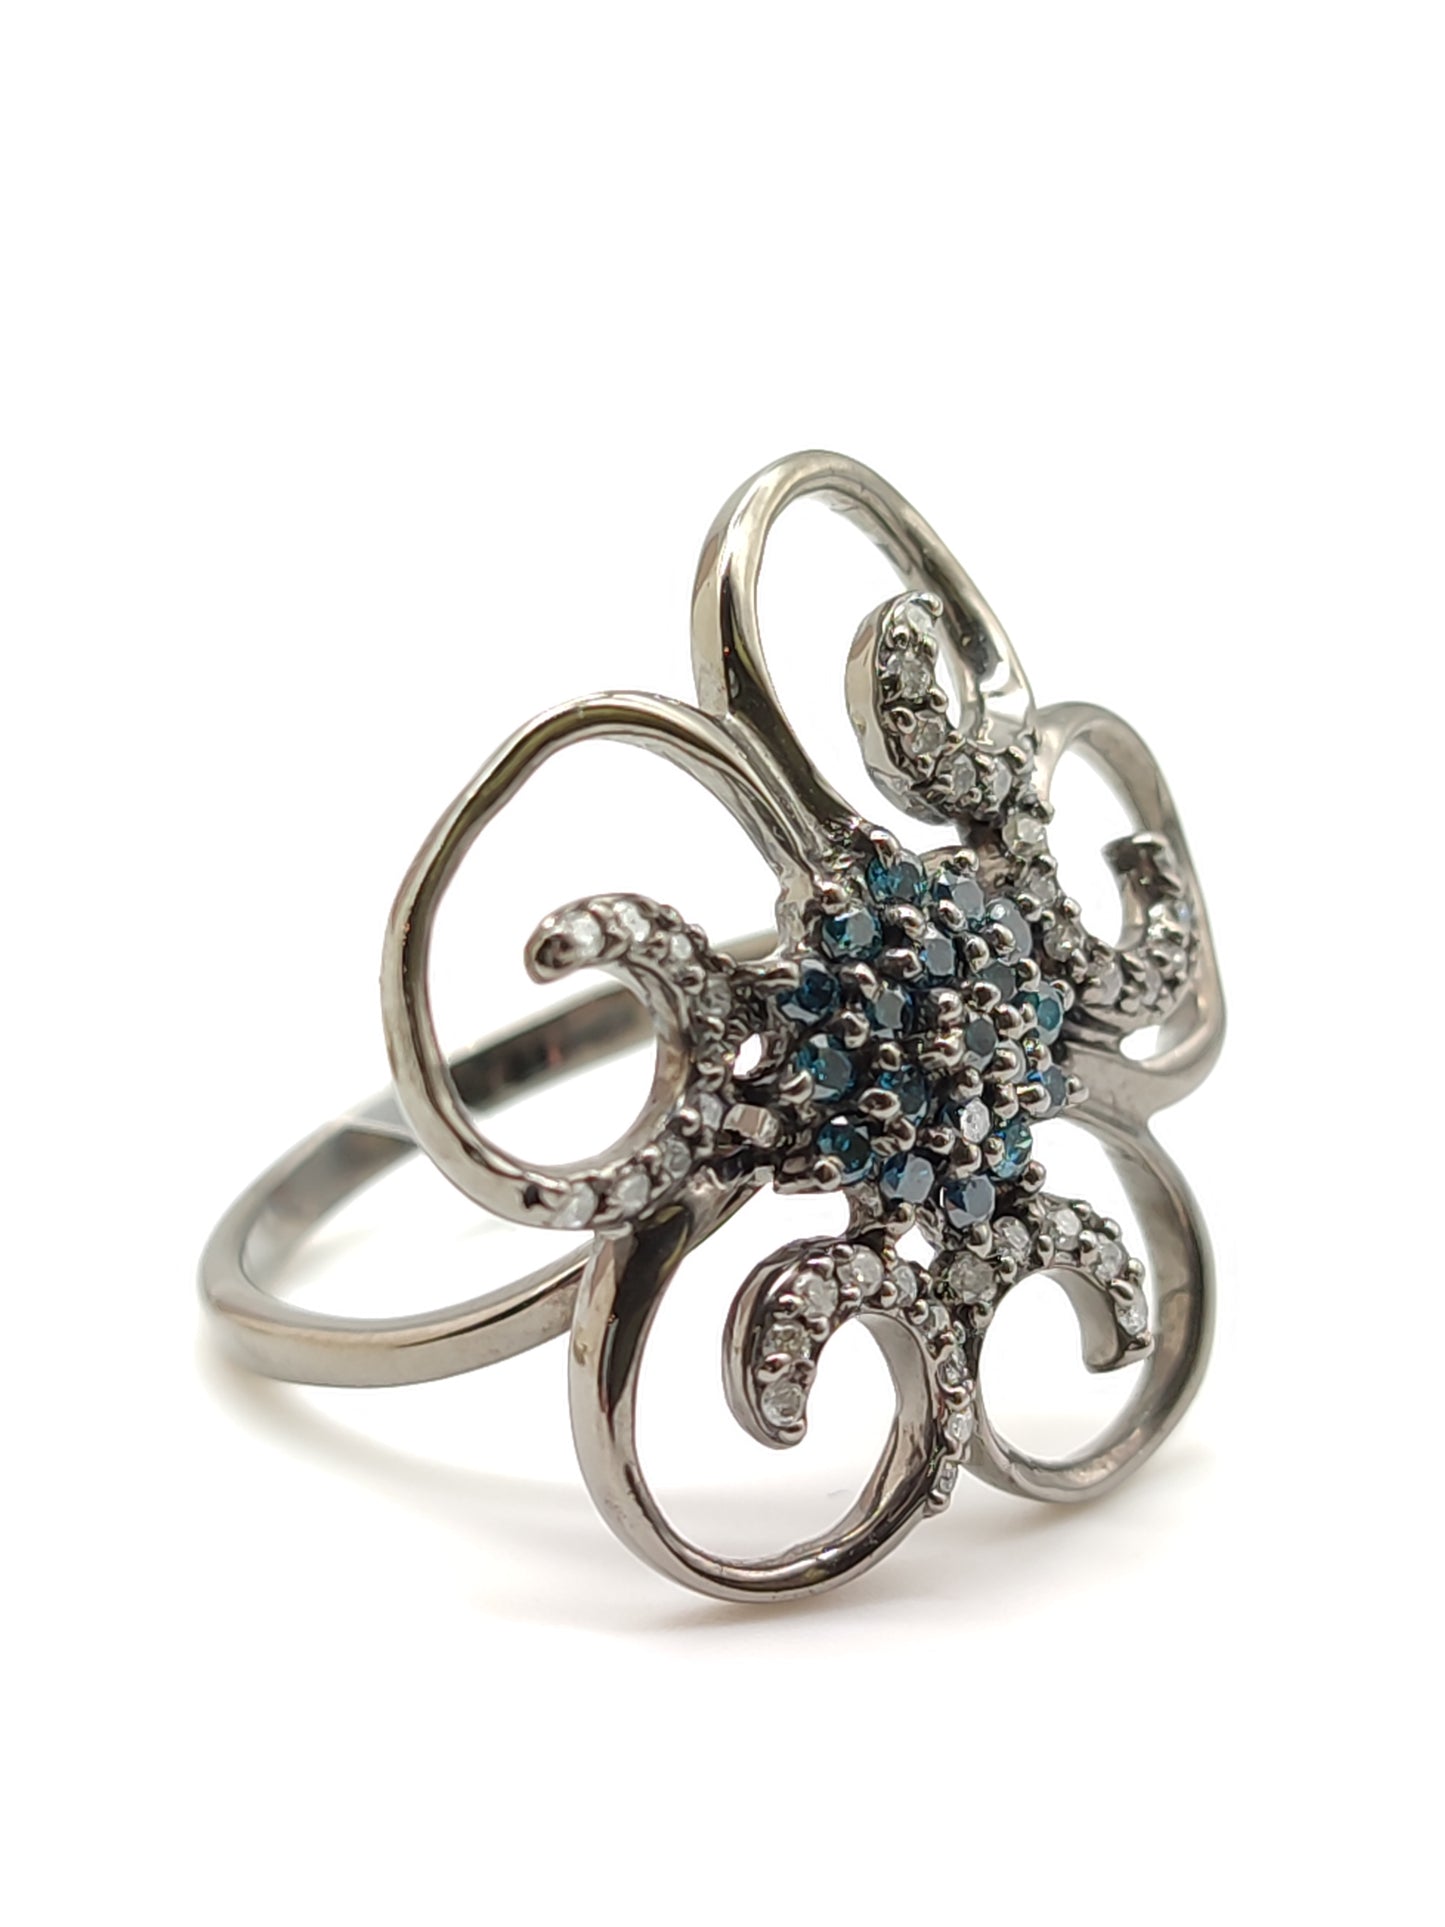 Pavan - Burnished silver ring with sapphires and diamonds